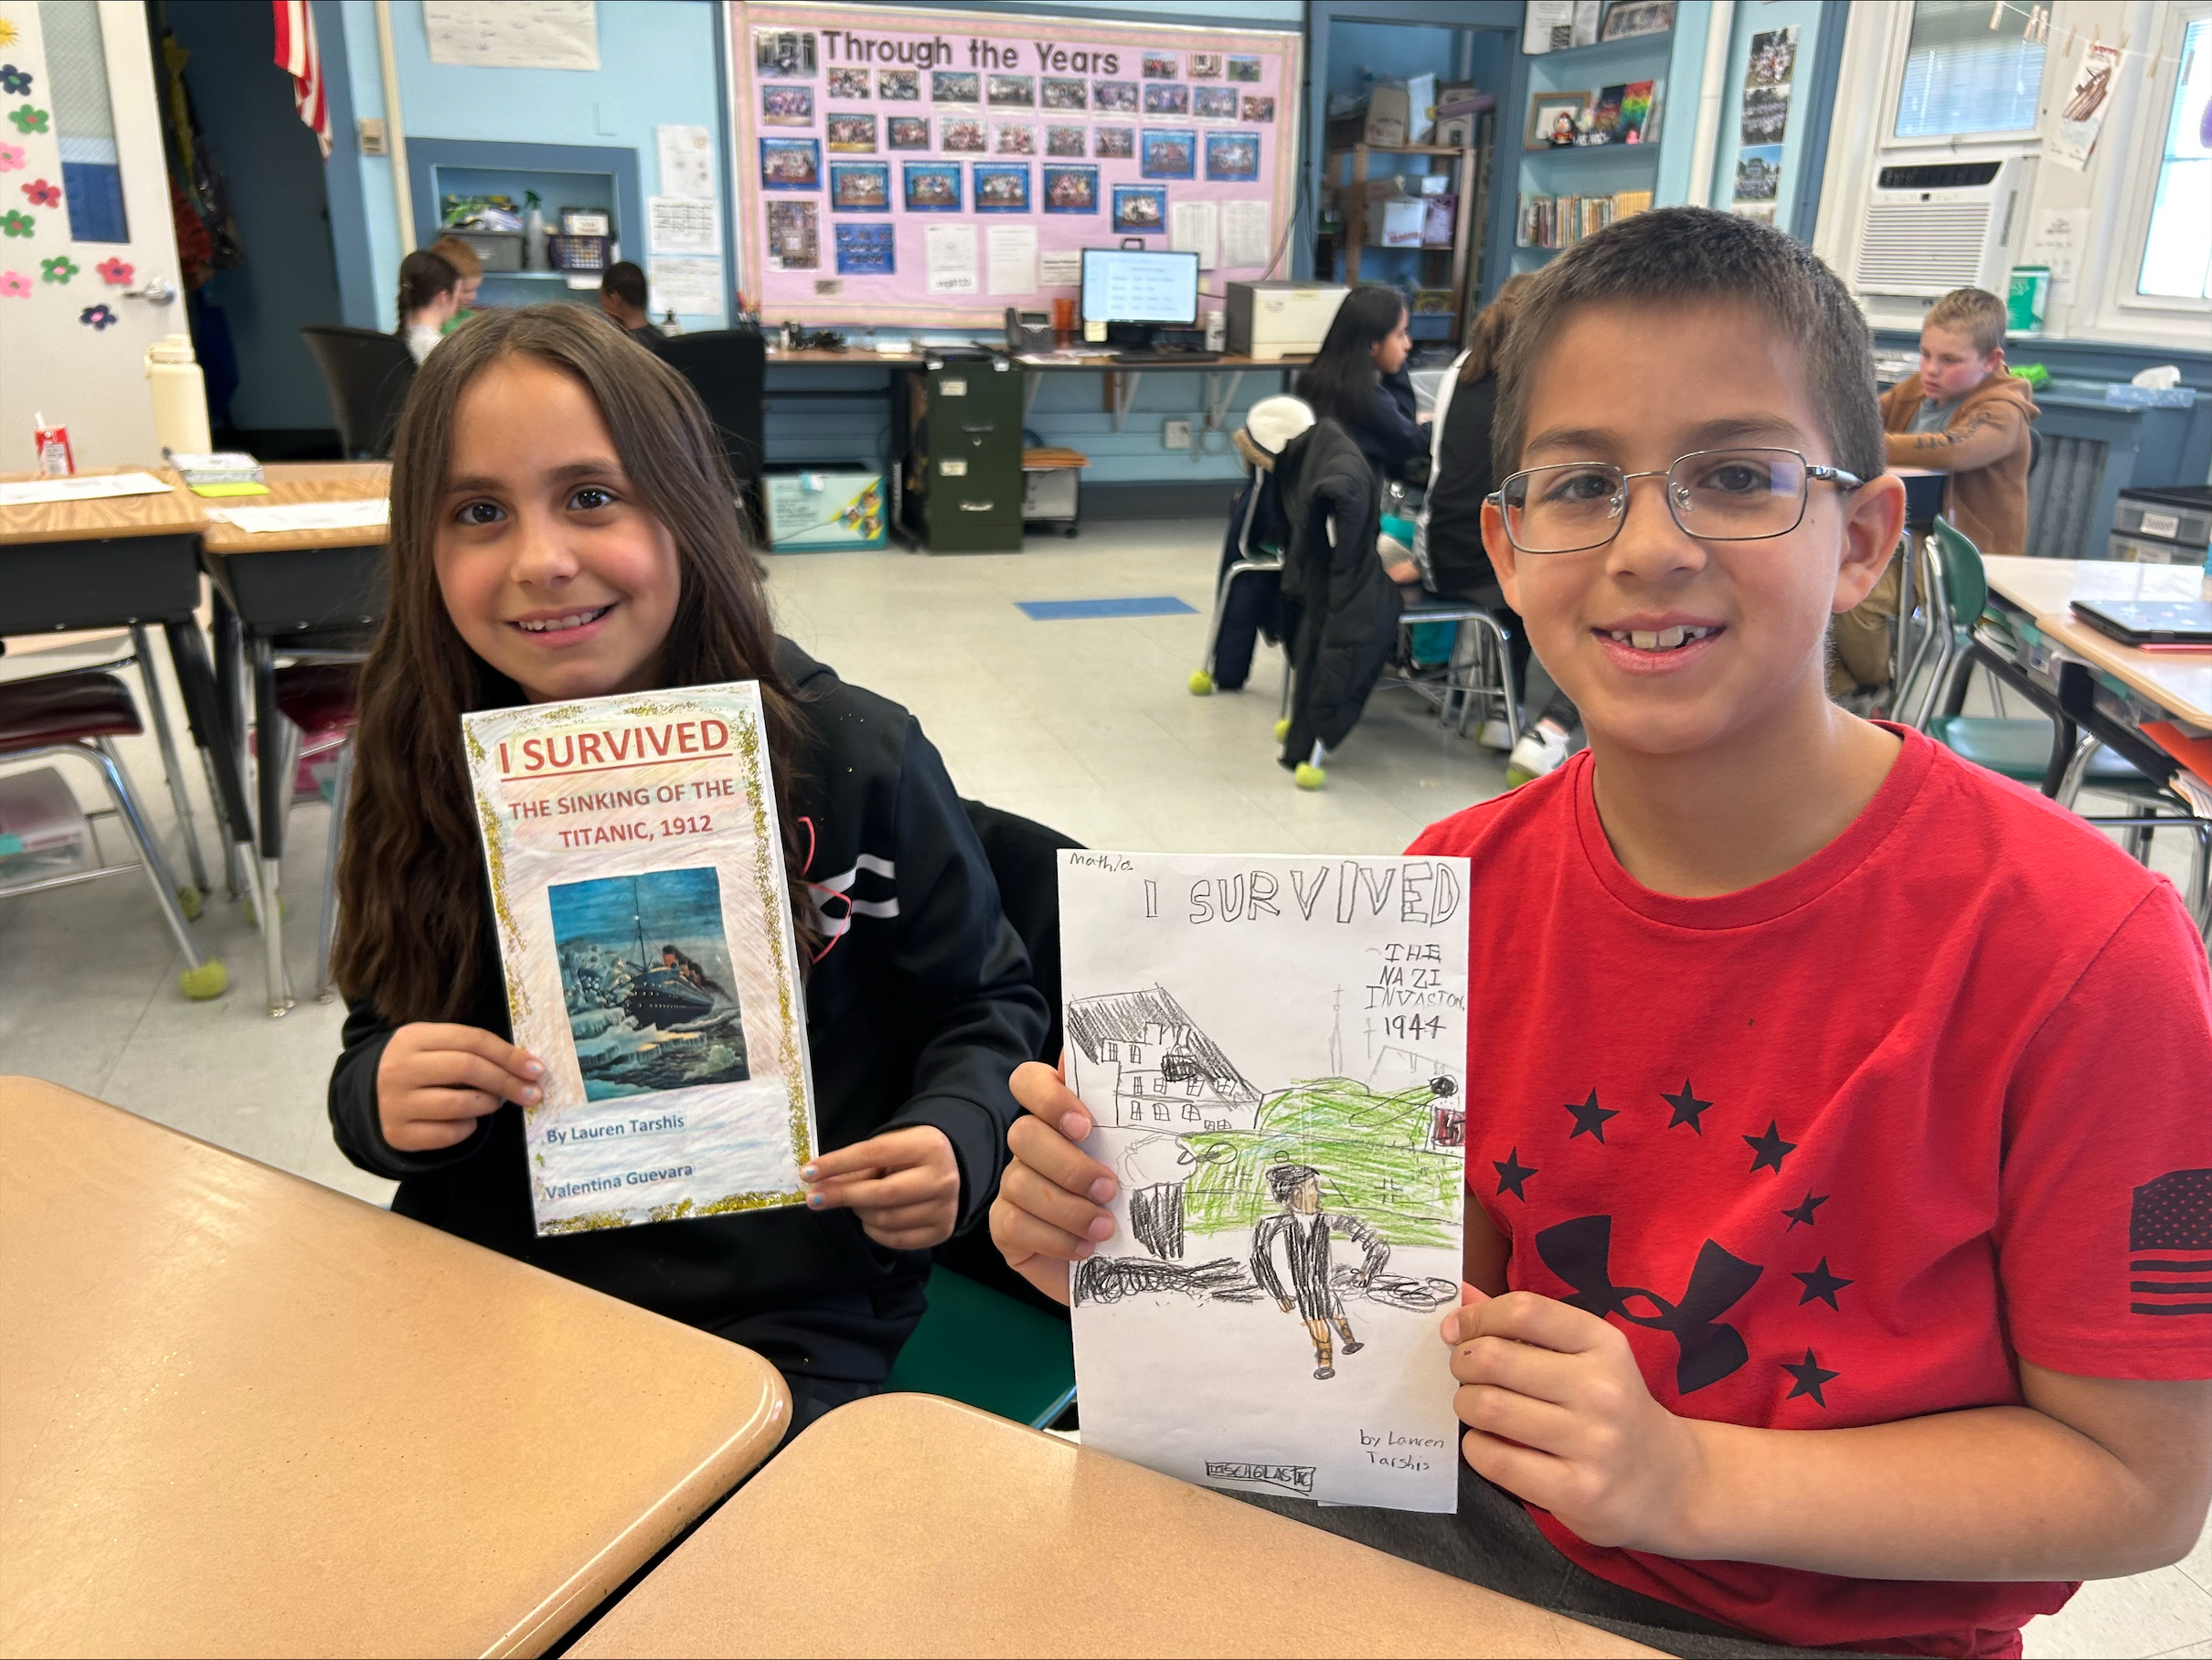 Hampton Bays Elementary School students in Amy McNamara's and Morgan Tiska's class, including Valentina Guevara and Mathias Herbel-Monsalve, recently created book jackets and book reports as part of a historical fiction unit. After reading a work of historical fiction, the students wrote a summary and provided information on the characters and the work’s historical context. To complete their reports,
they enclosed them in book jackets that they had illustrated. They also presented their projects and made book recommendations to their classmates. COURTESY HAMPTON BAYS SCHOOL DISTRICT